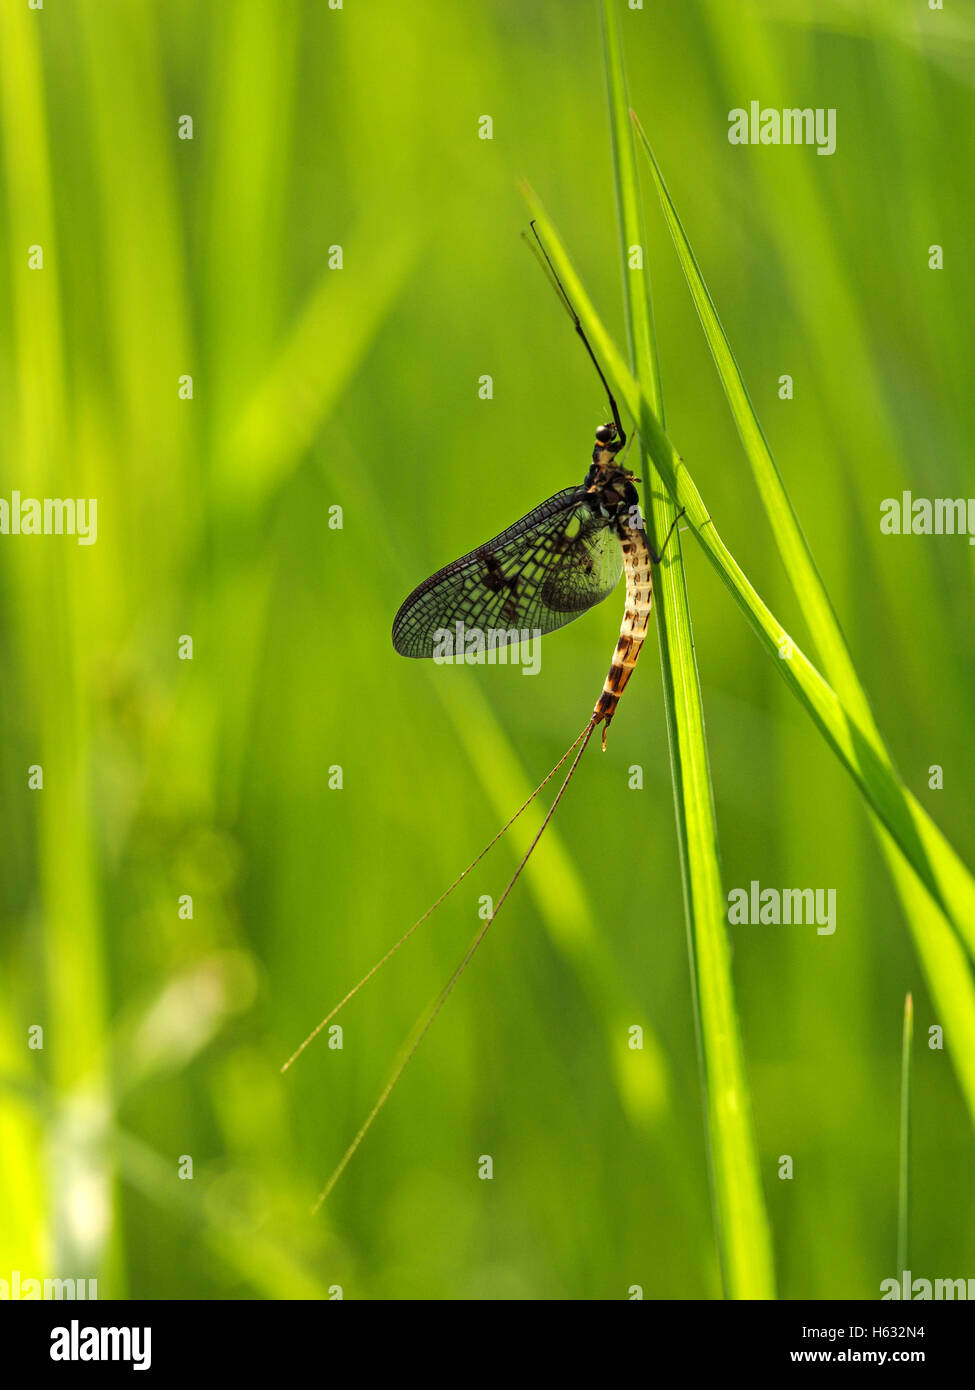 portrait format image of Mayfly Ephemeroptera sp - long jointed antennae black eyes two long tails cream & brown spotted abdomen Stock Photo